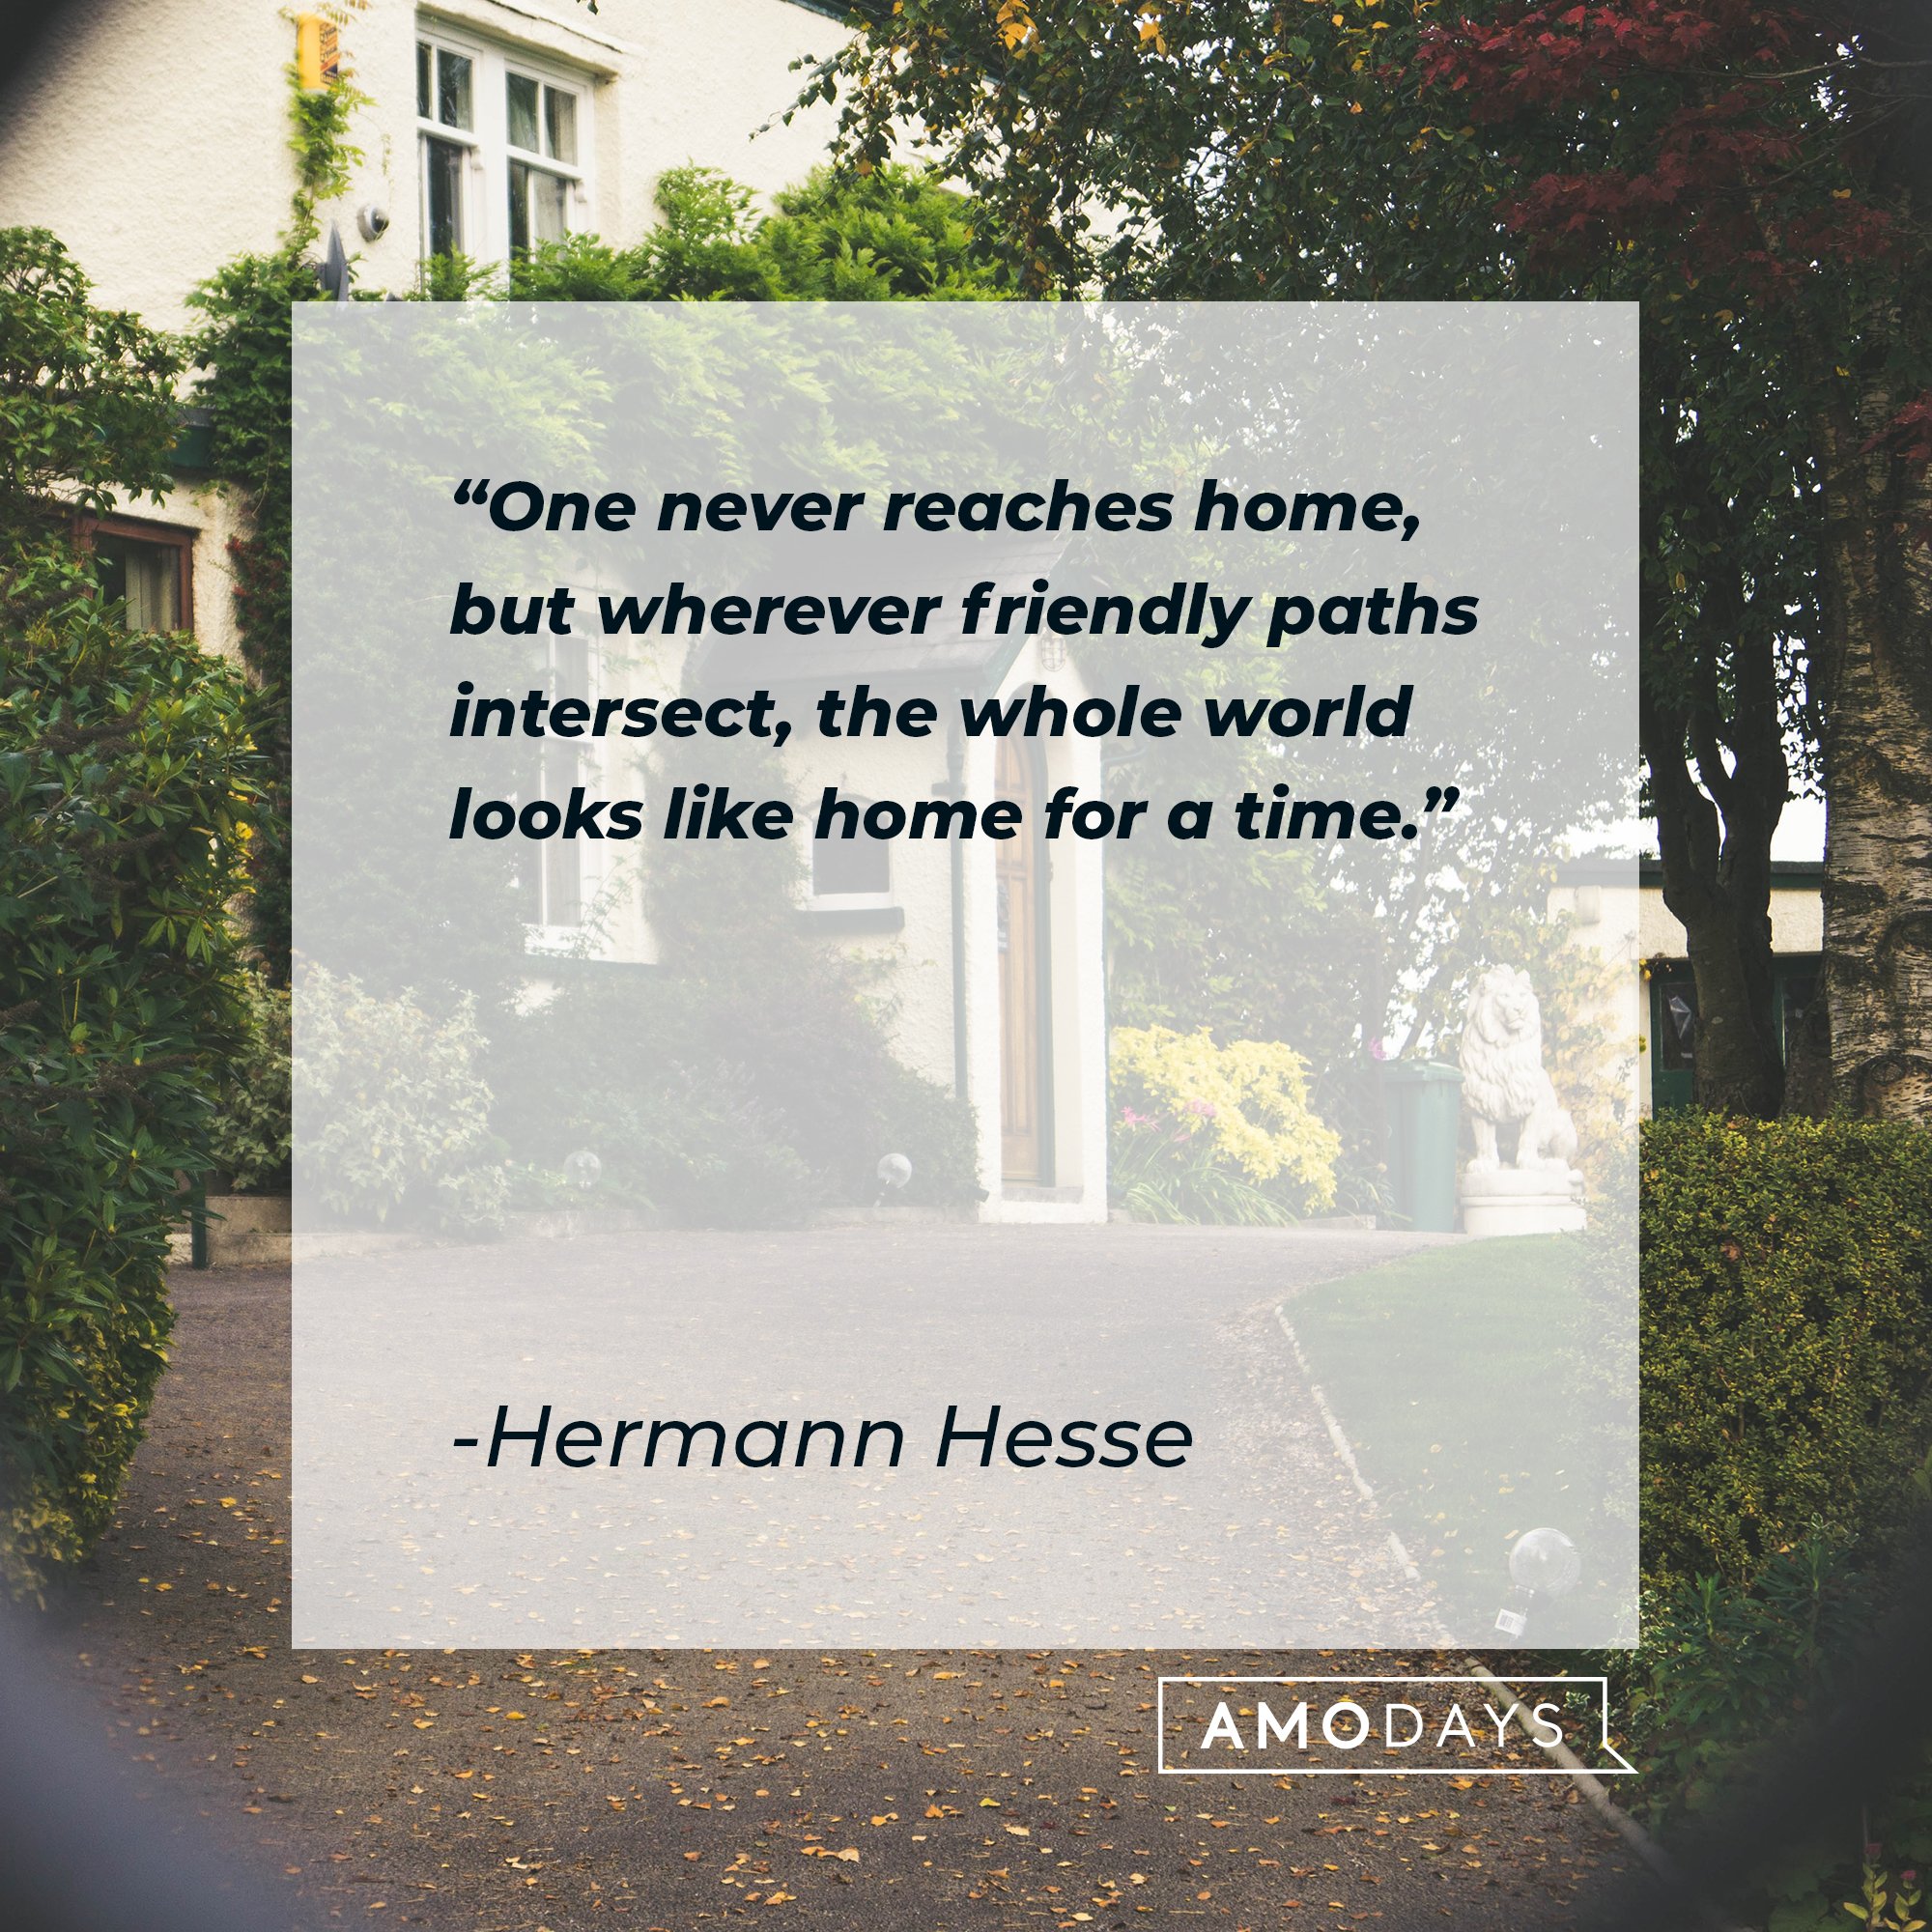 Hermann Hesse's quote: "One never reaches home, but wherever friendly paths intersect, the whole world looks like home for a time." | Image: AmoDays